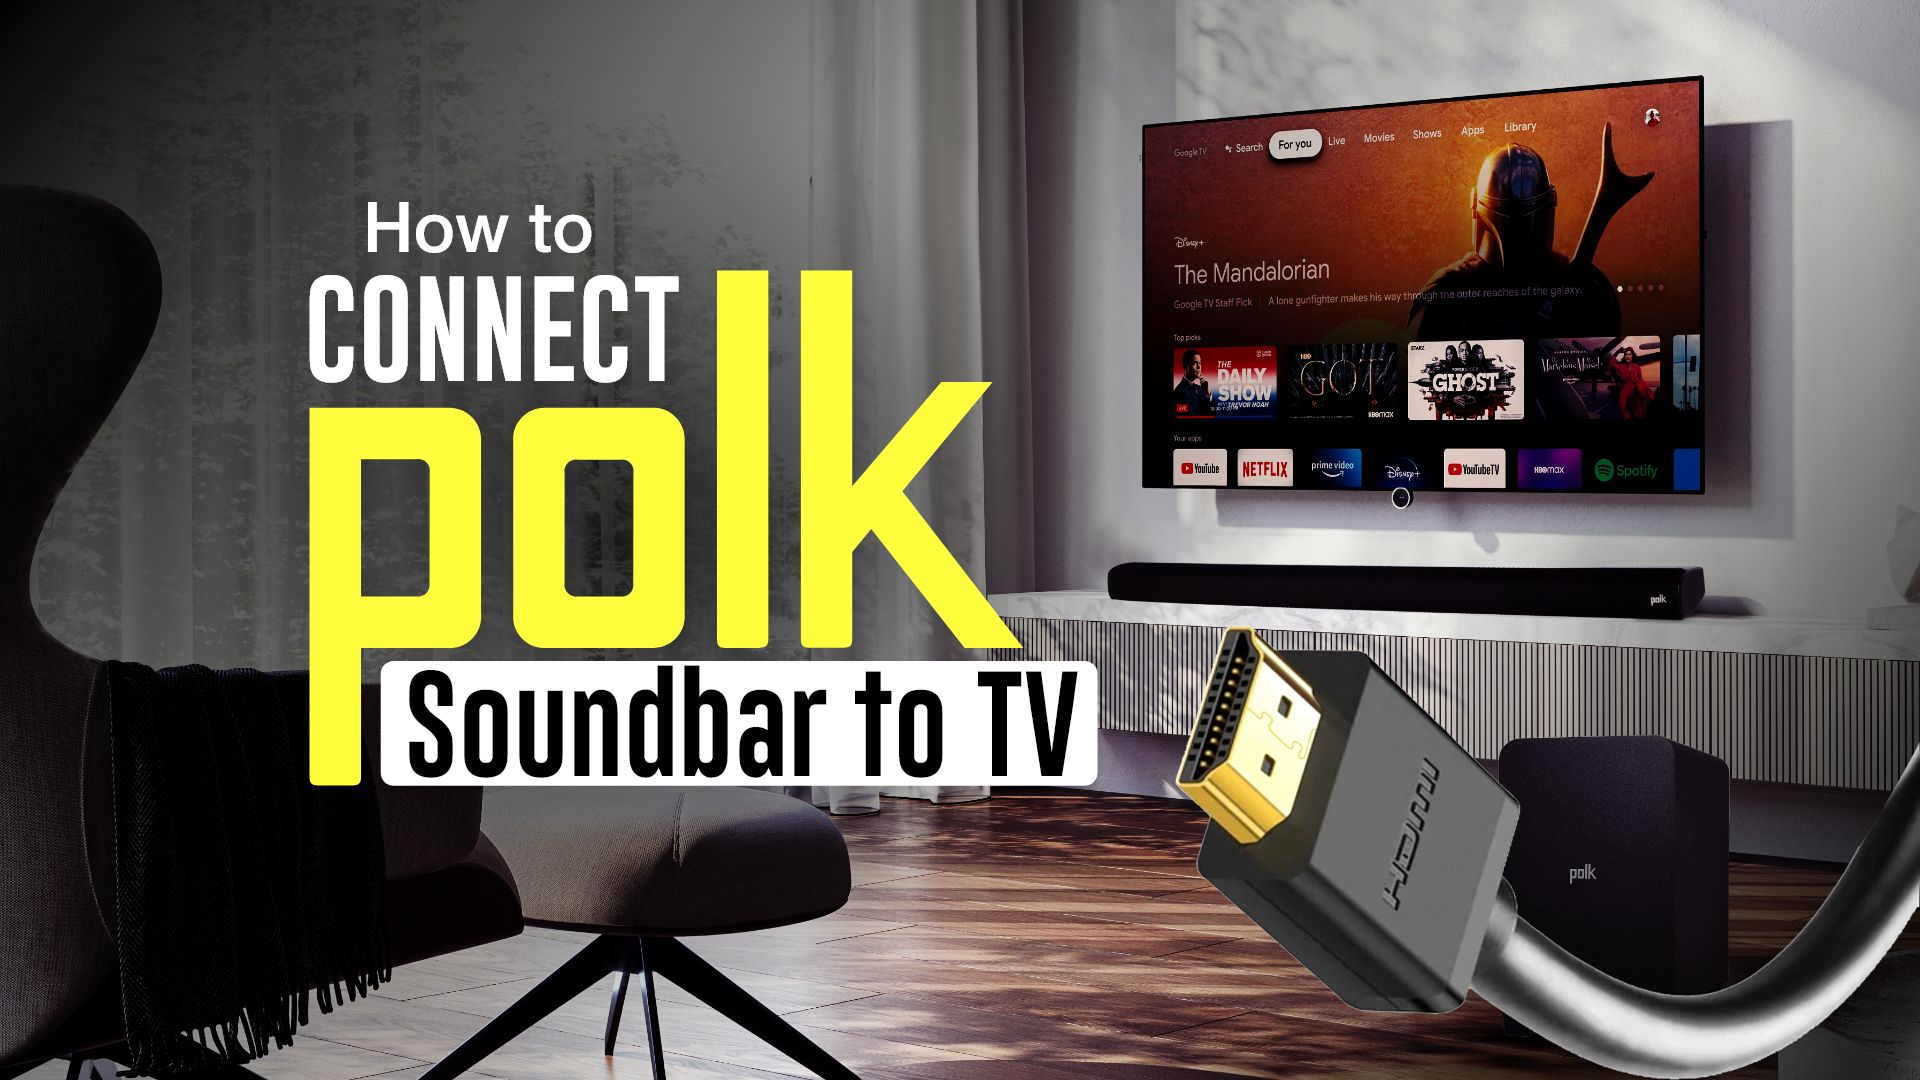 How to Connect Polk Soundbar to TV – A Complete Guide